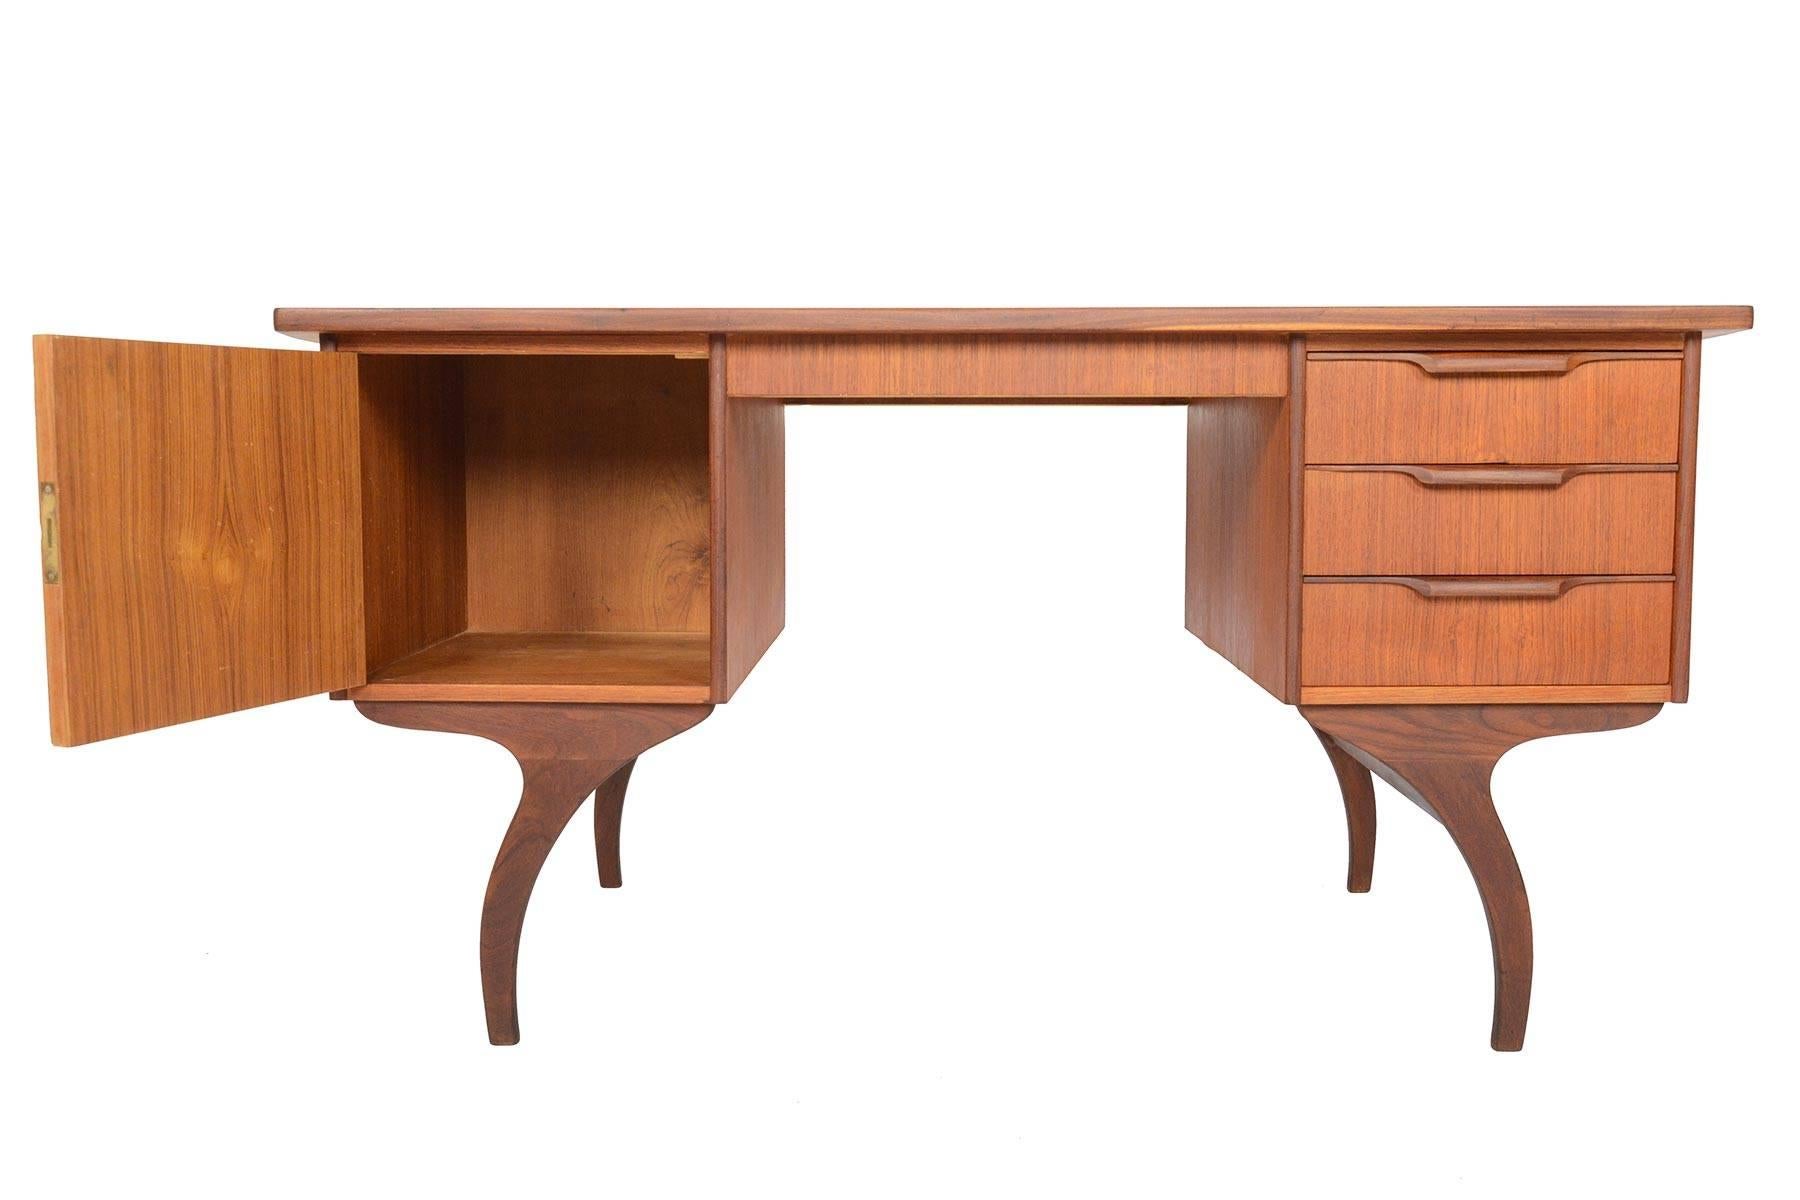 This Danish modern midcentury writing desk in teak is simple in concept but is brimming with organic design details. This unusual design offers a large locking cabinet and a bank of three drawers flanking the kneehole. Beautifully contoured